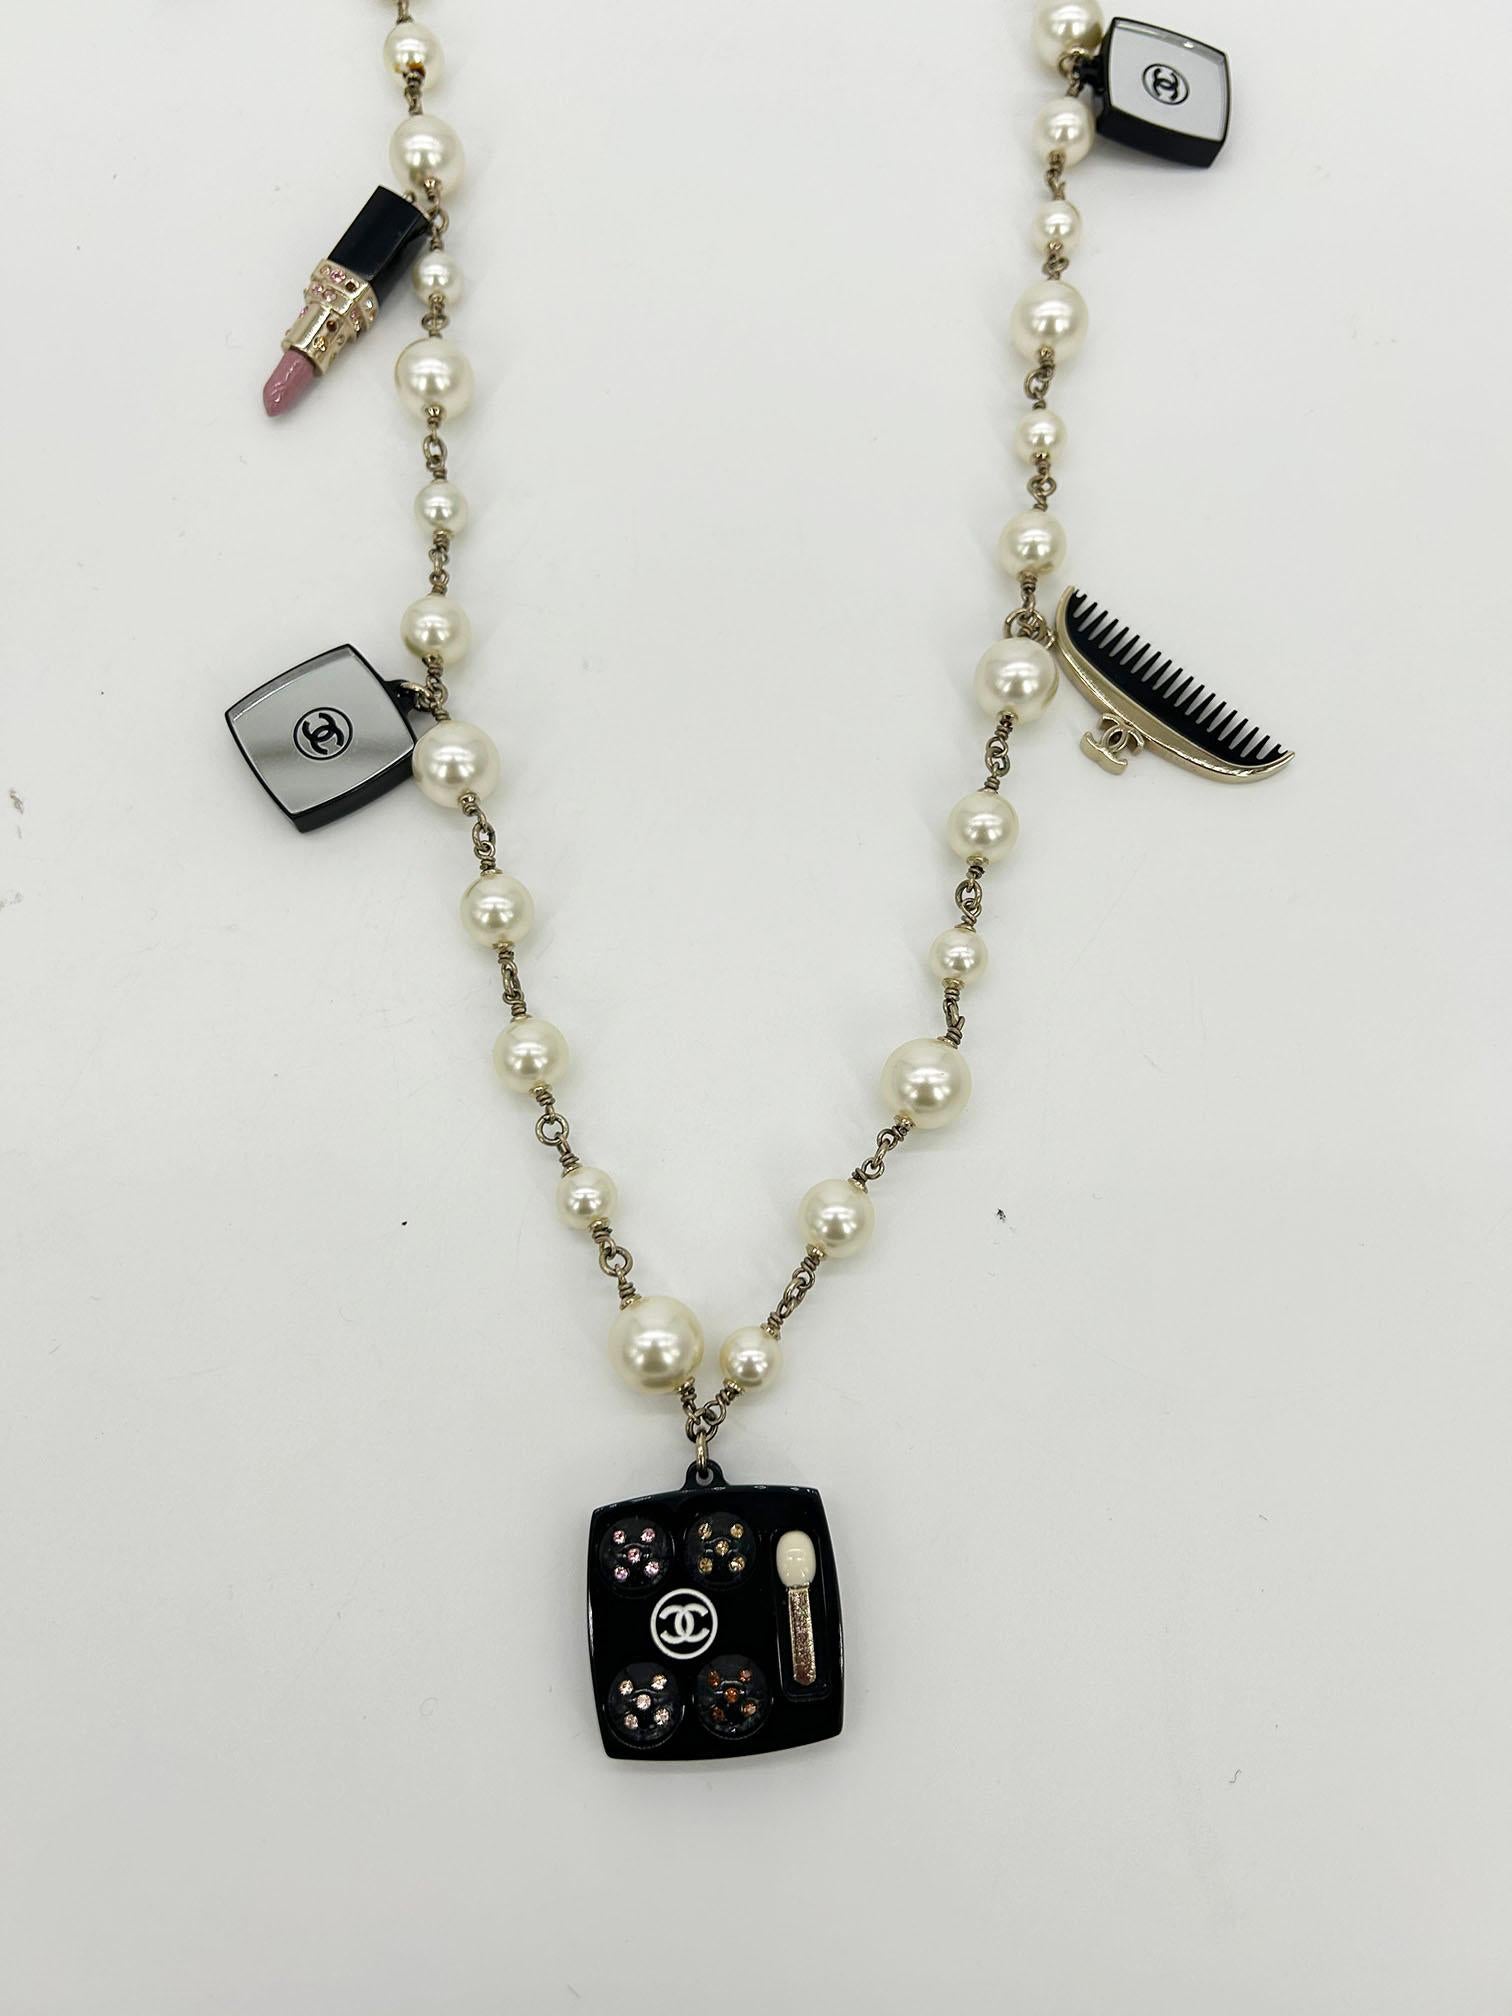 Chanel Vintage Make Up Charm Beaded Pearl Chain Necklace in excellent condition. Beaded pearls with chain links between and adorable acrylic beauty charms throughout. 3 square mirrors with black backs and multi colored crystals. clear perfume bottle